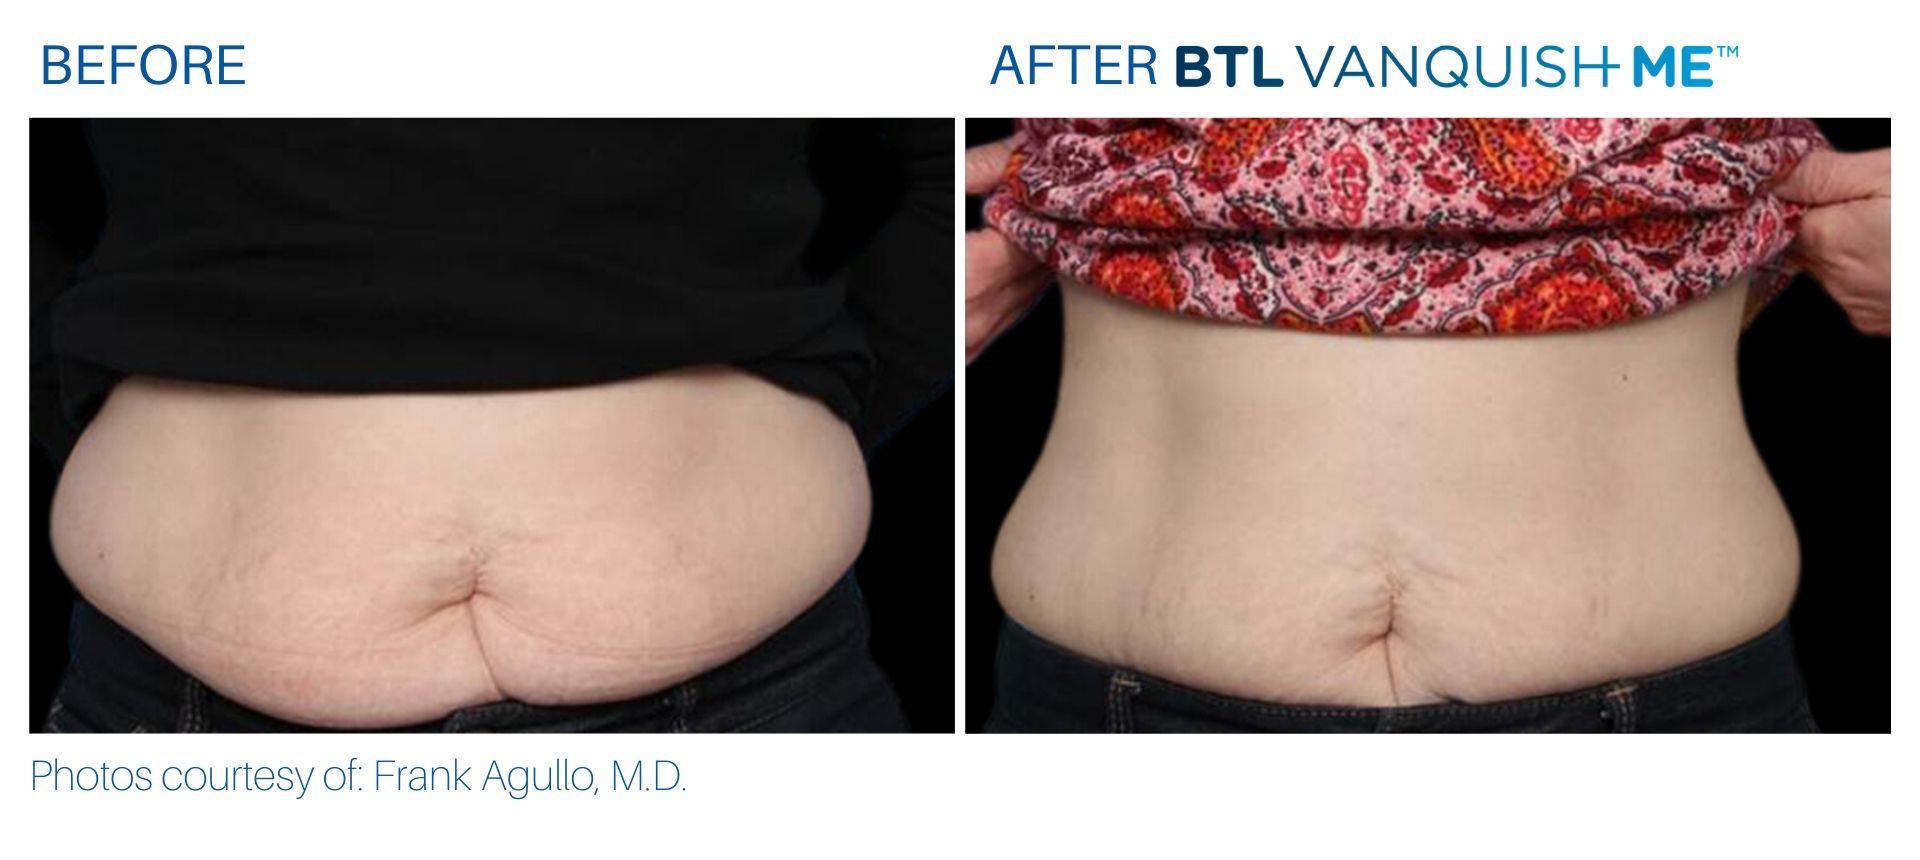 BTL Vanquish ME before and after Body Reflections in Somers, CT